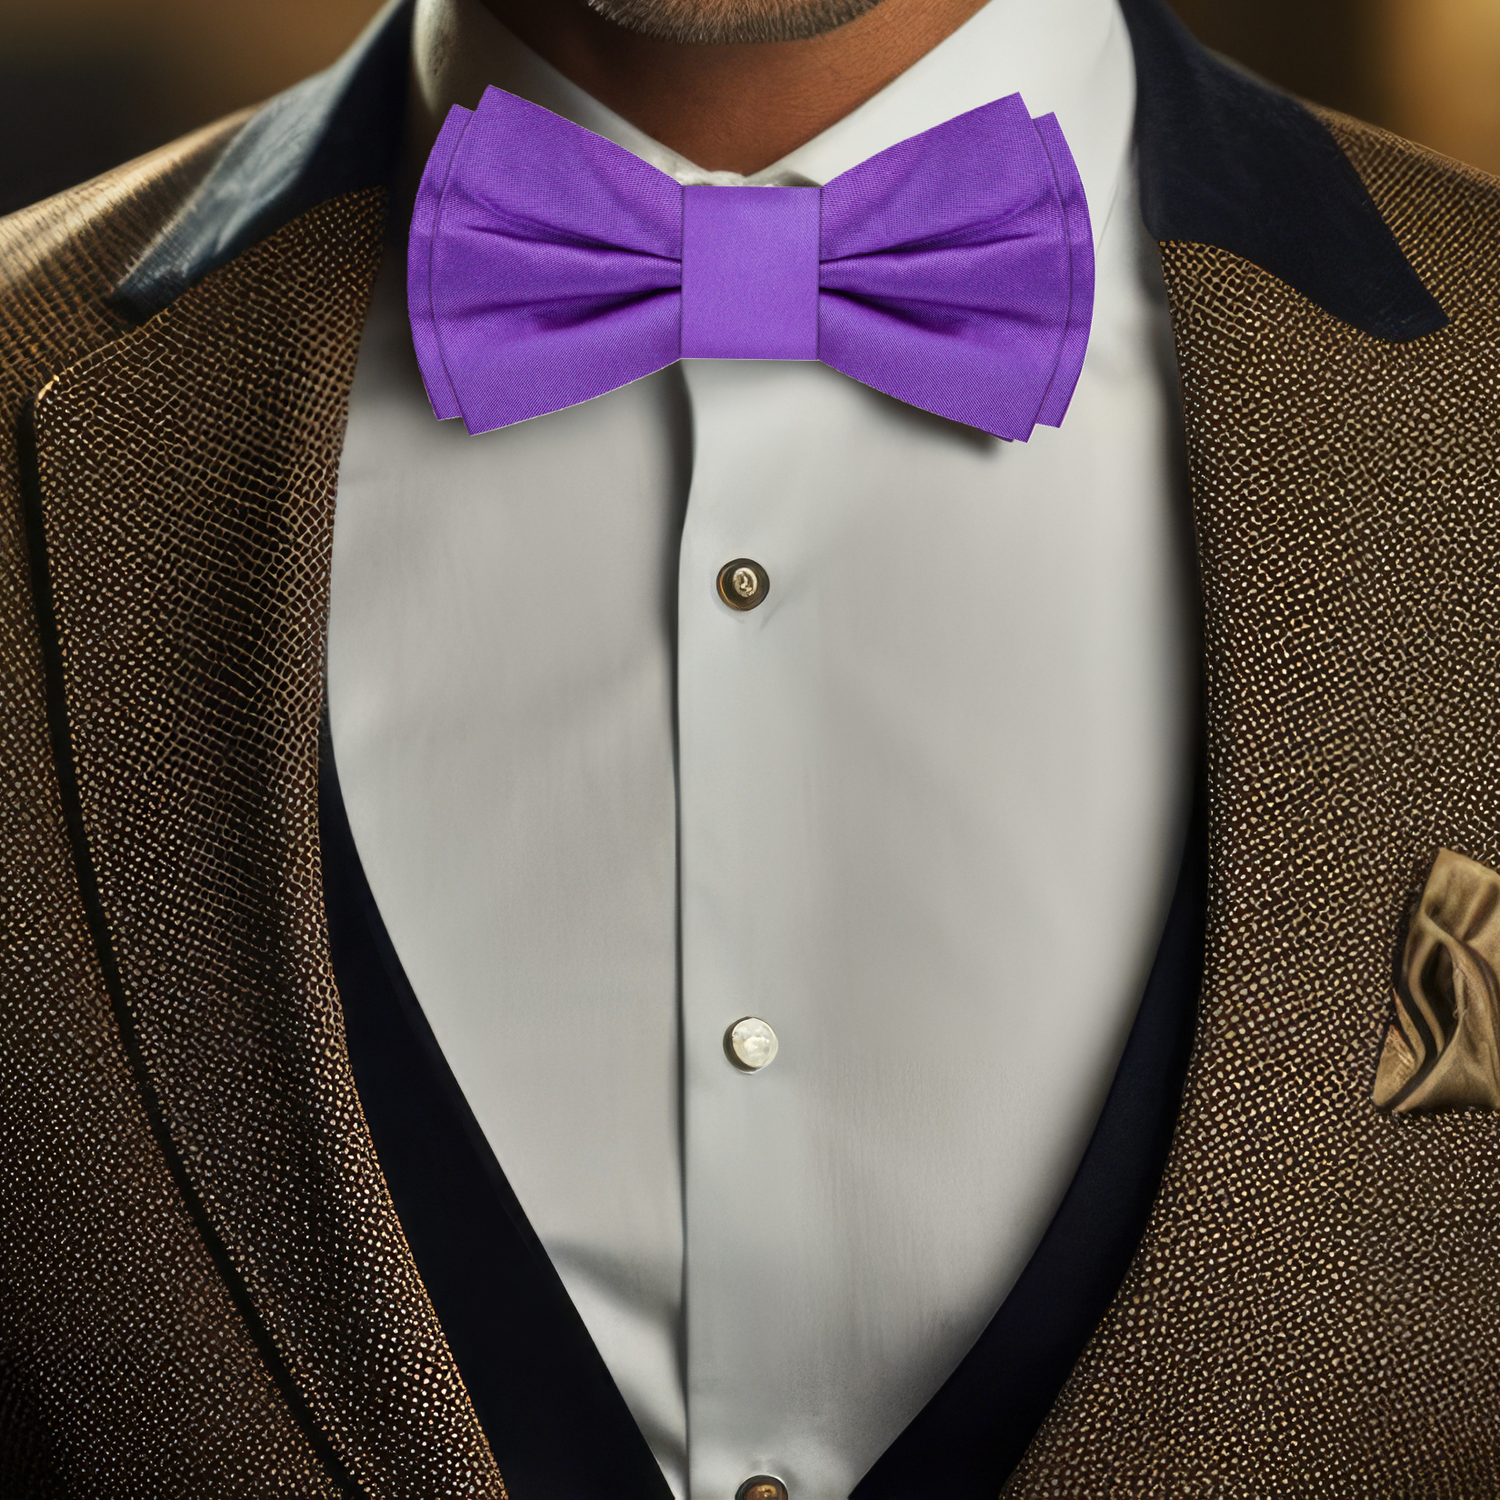 Solid Purple Bow Tie on Brown Suit